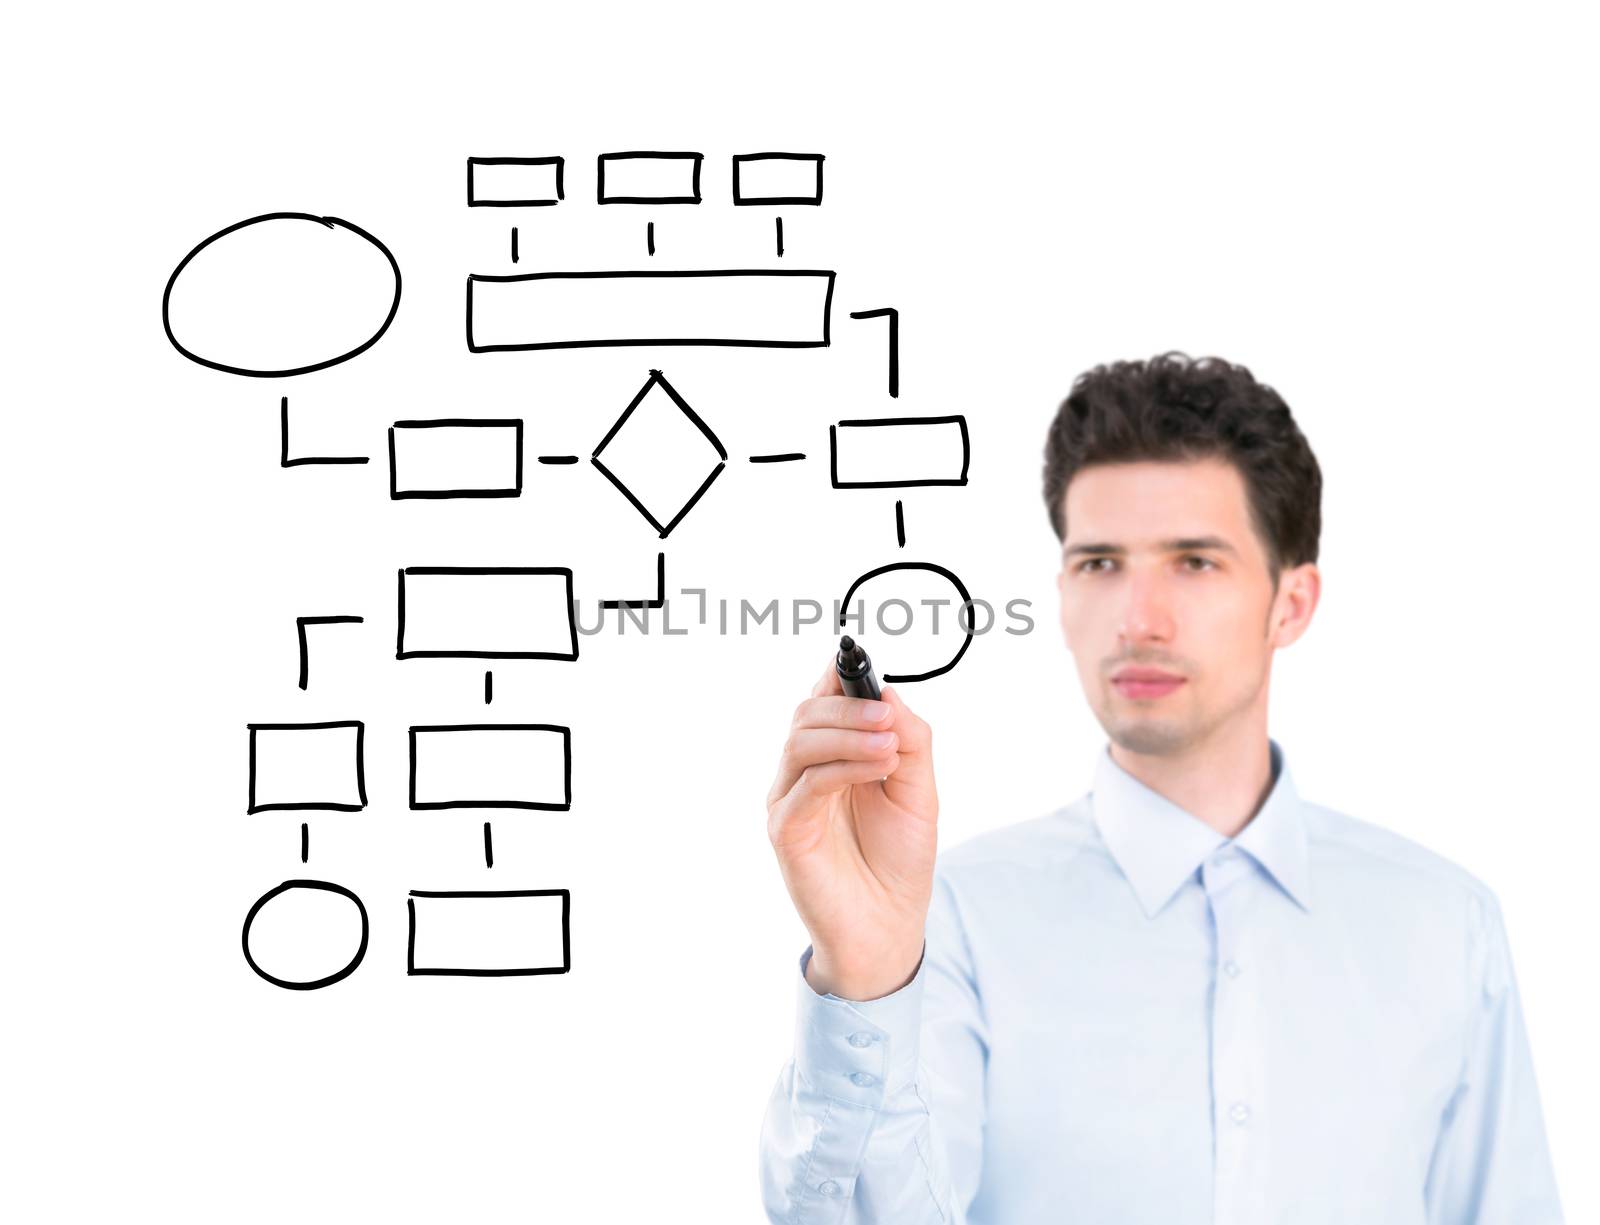 Portrait of a young pensive businessman holding a marker and drawing a blank flowchart. Isolated on white background.